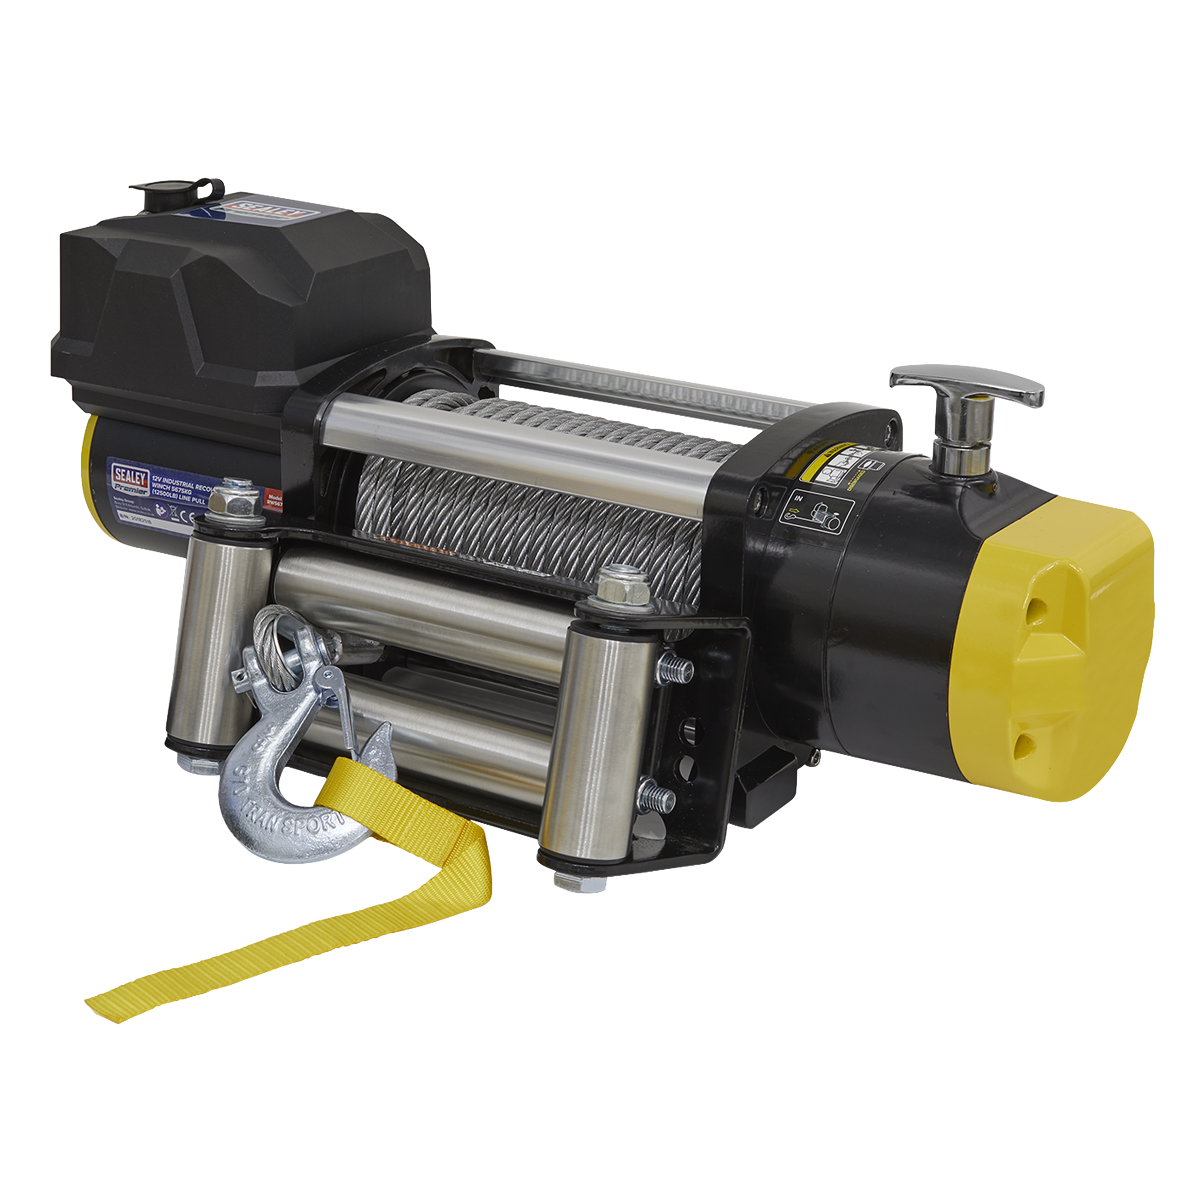 4.7kW 12V DC Series wound motor winch gives first class pulling power